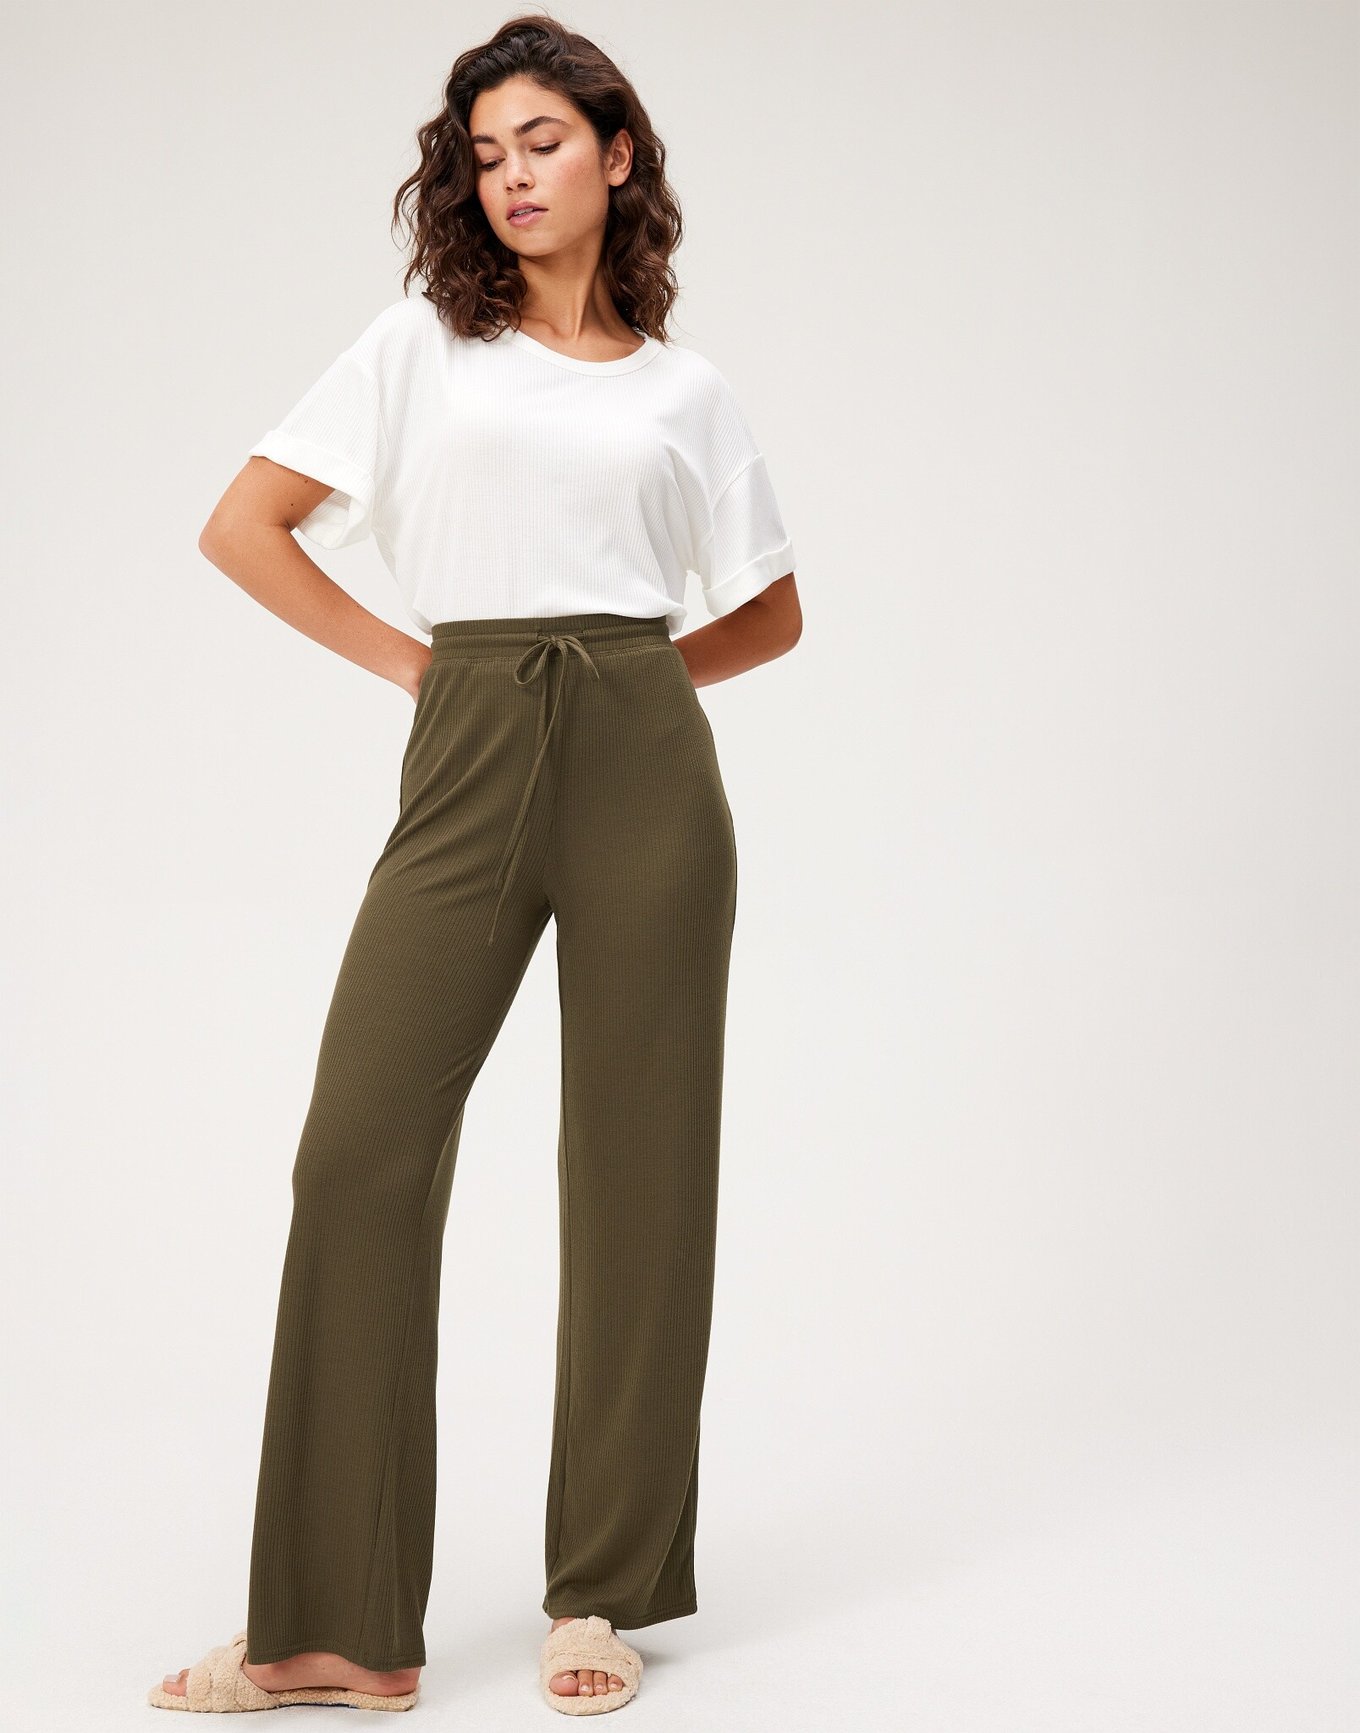 Best lounge pants, according to experts | CNN Underscored